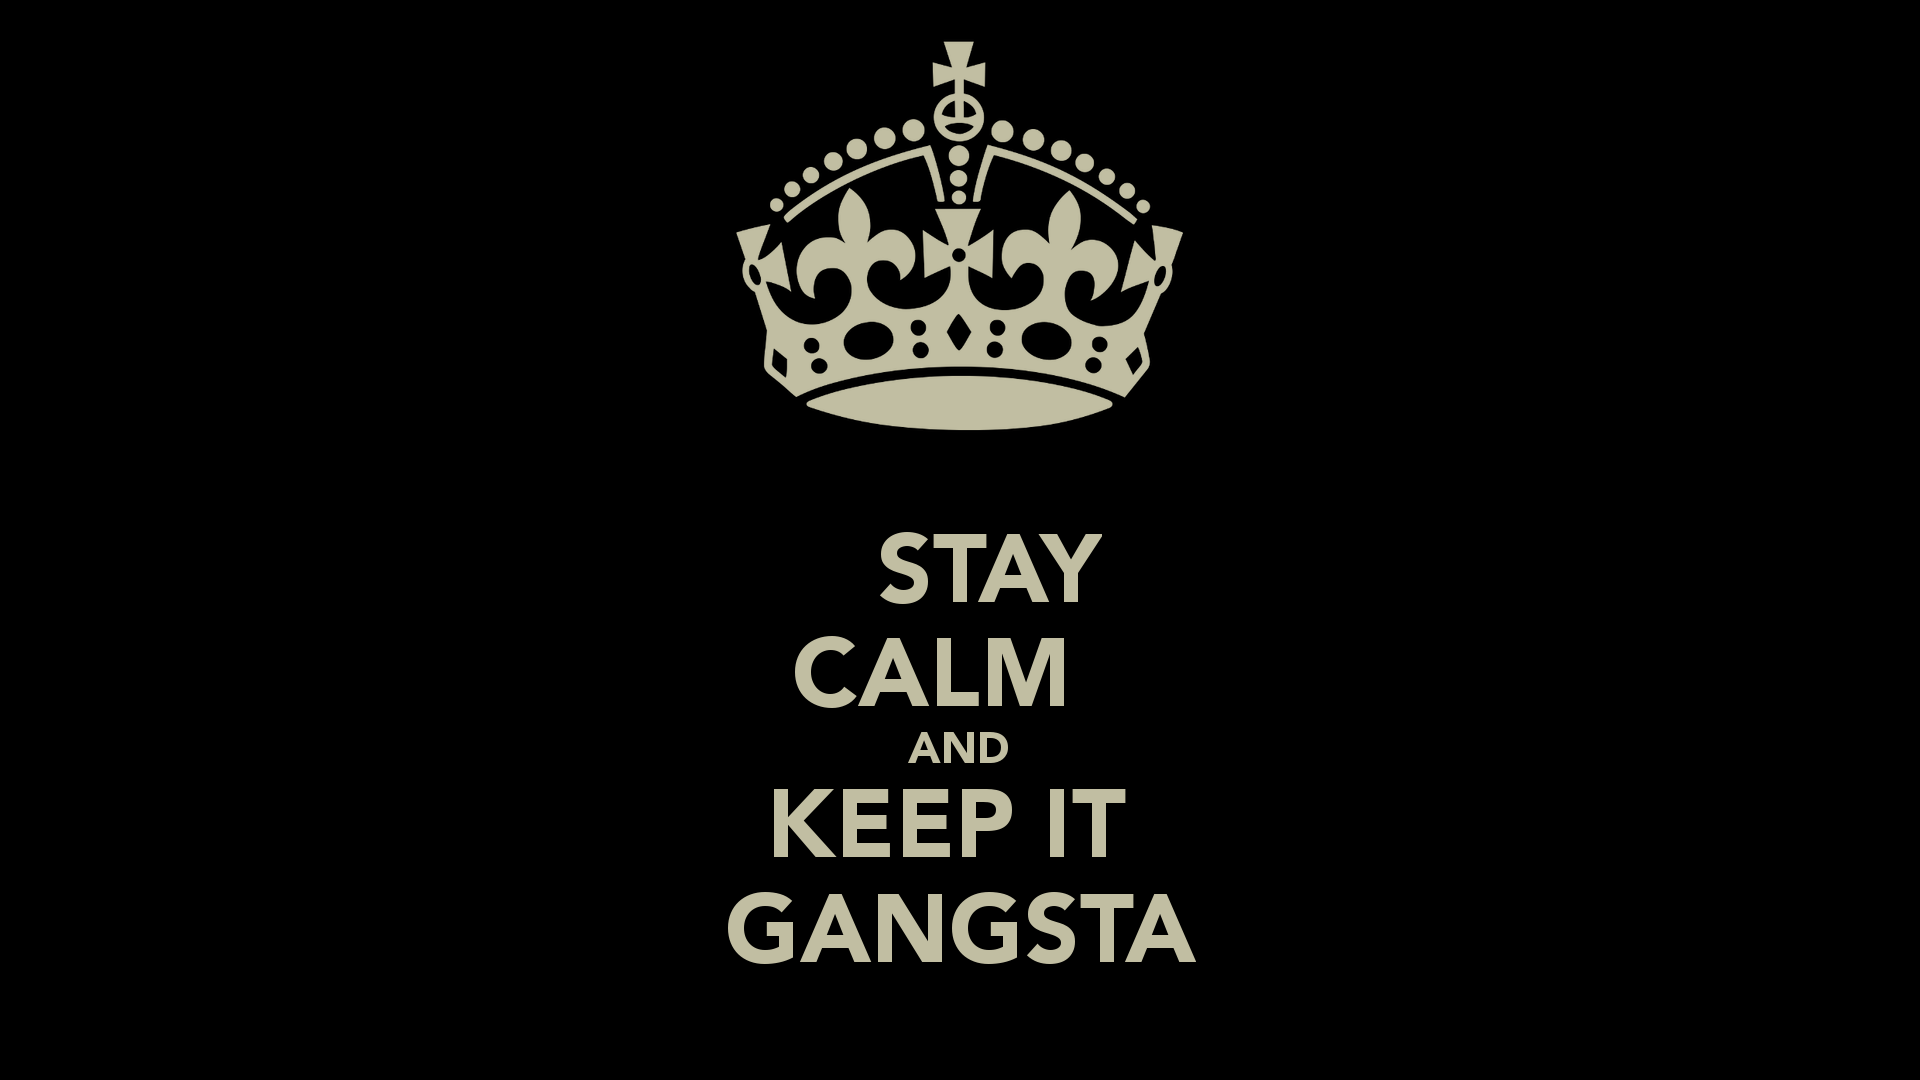 STAY CALM AND KEEP IT GANGSTA CALM AND CARRY ON Image Generator